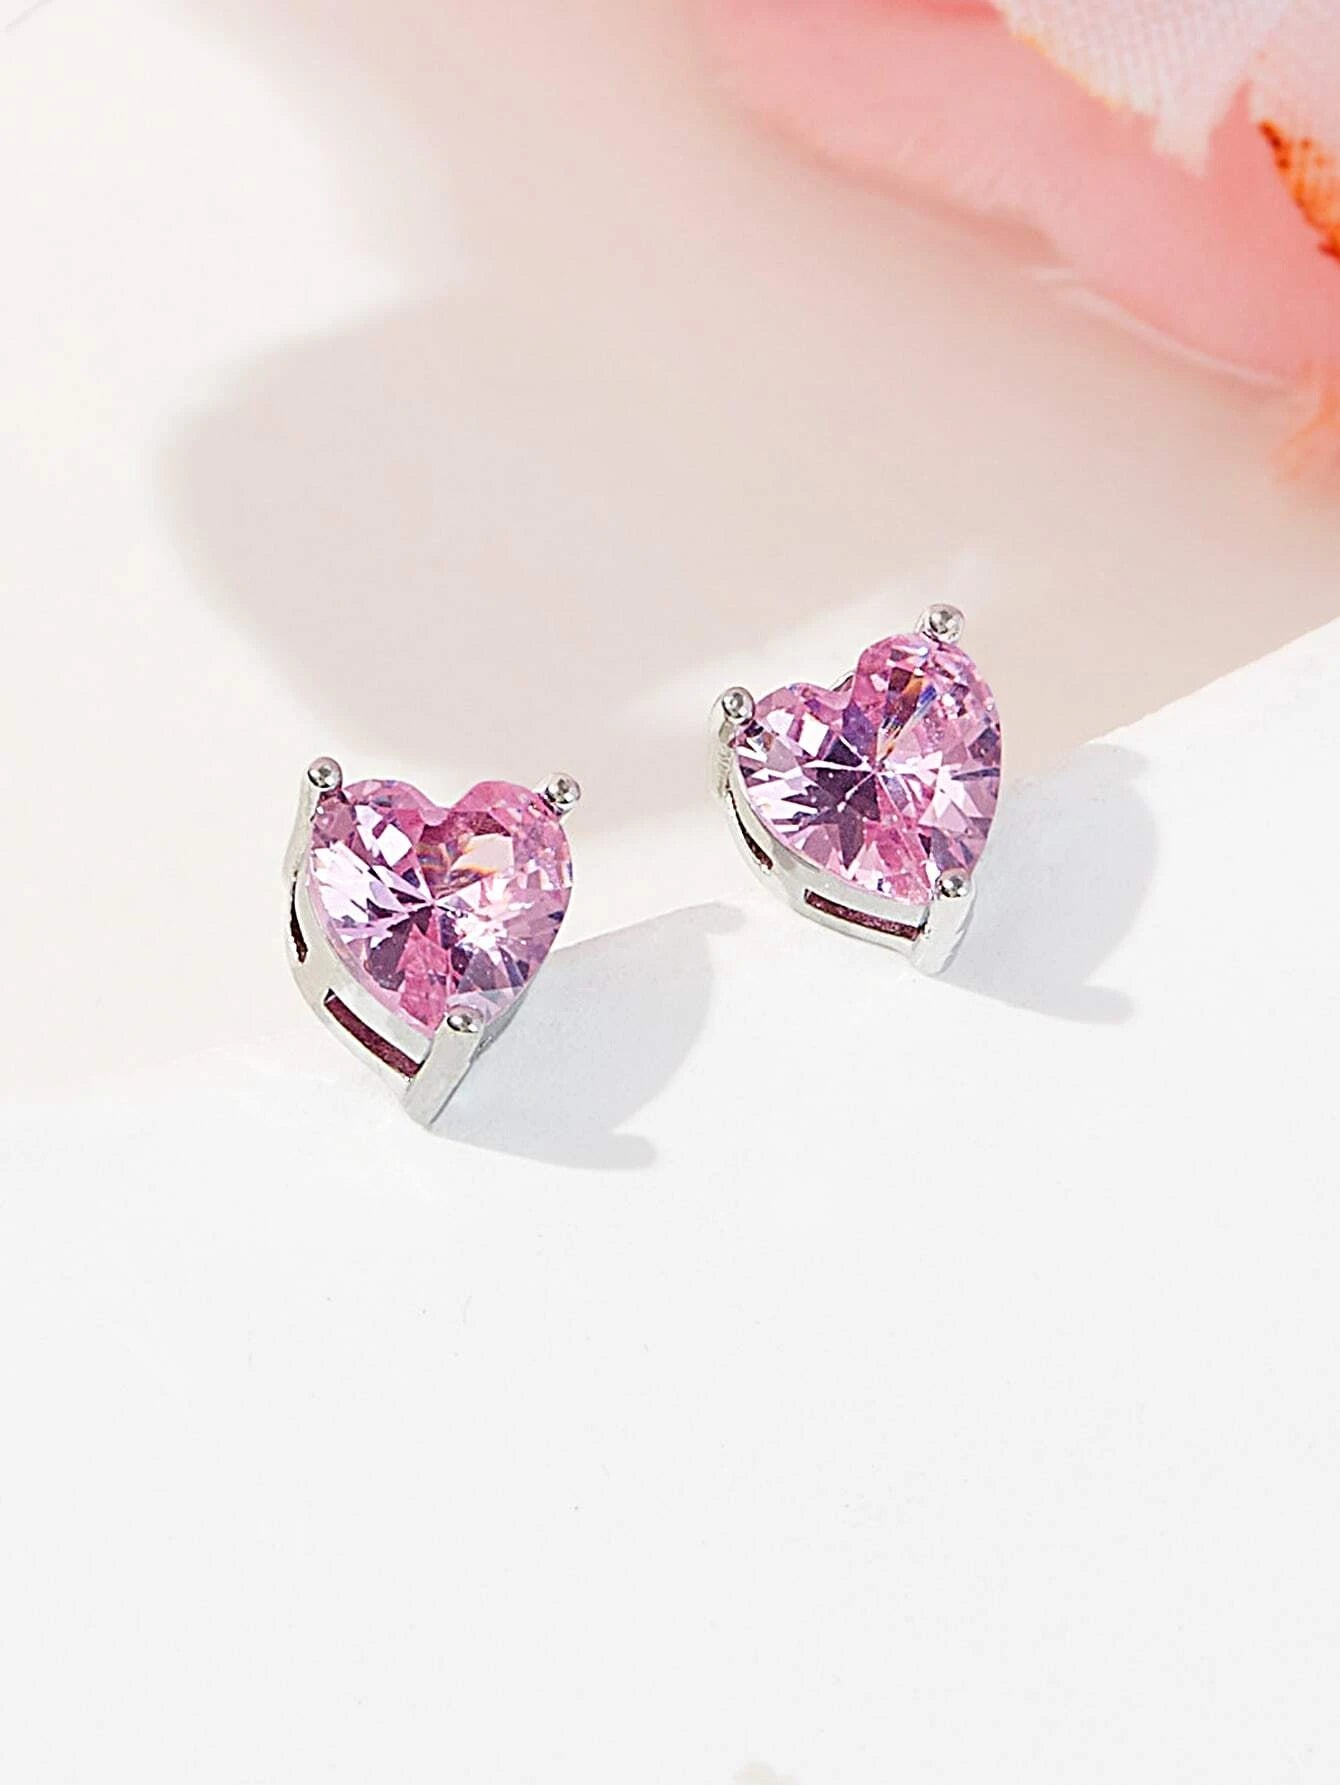 Set of 4 Earrings Decorated with Cubic Zirconia Bows and Hearts.